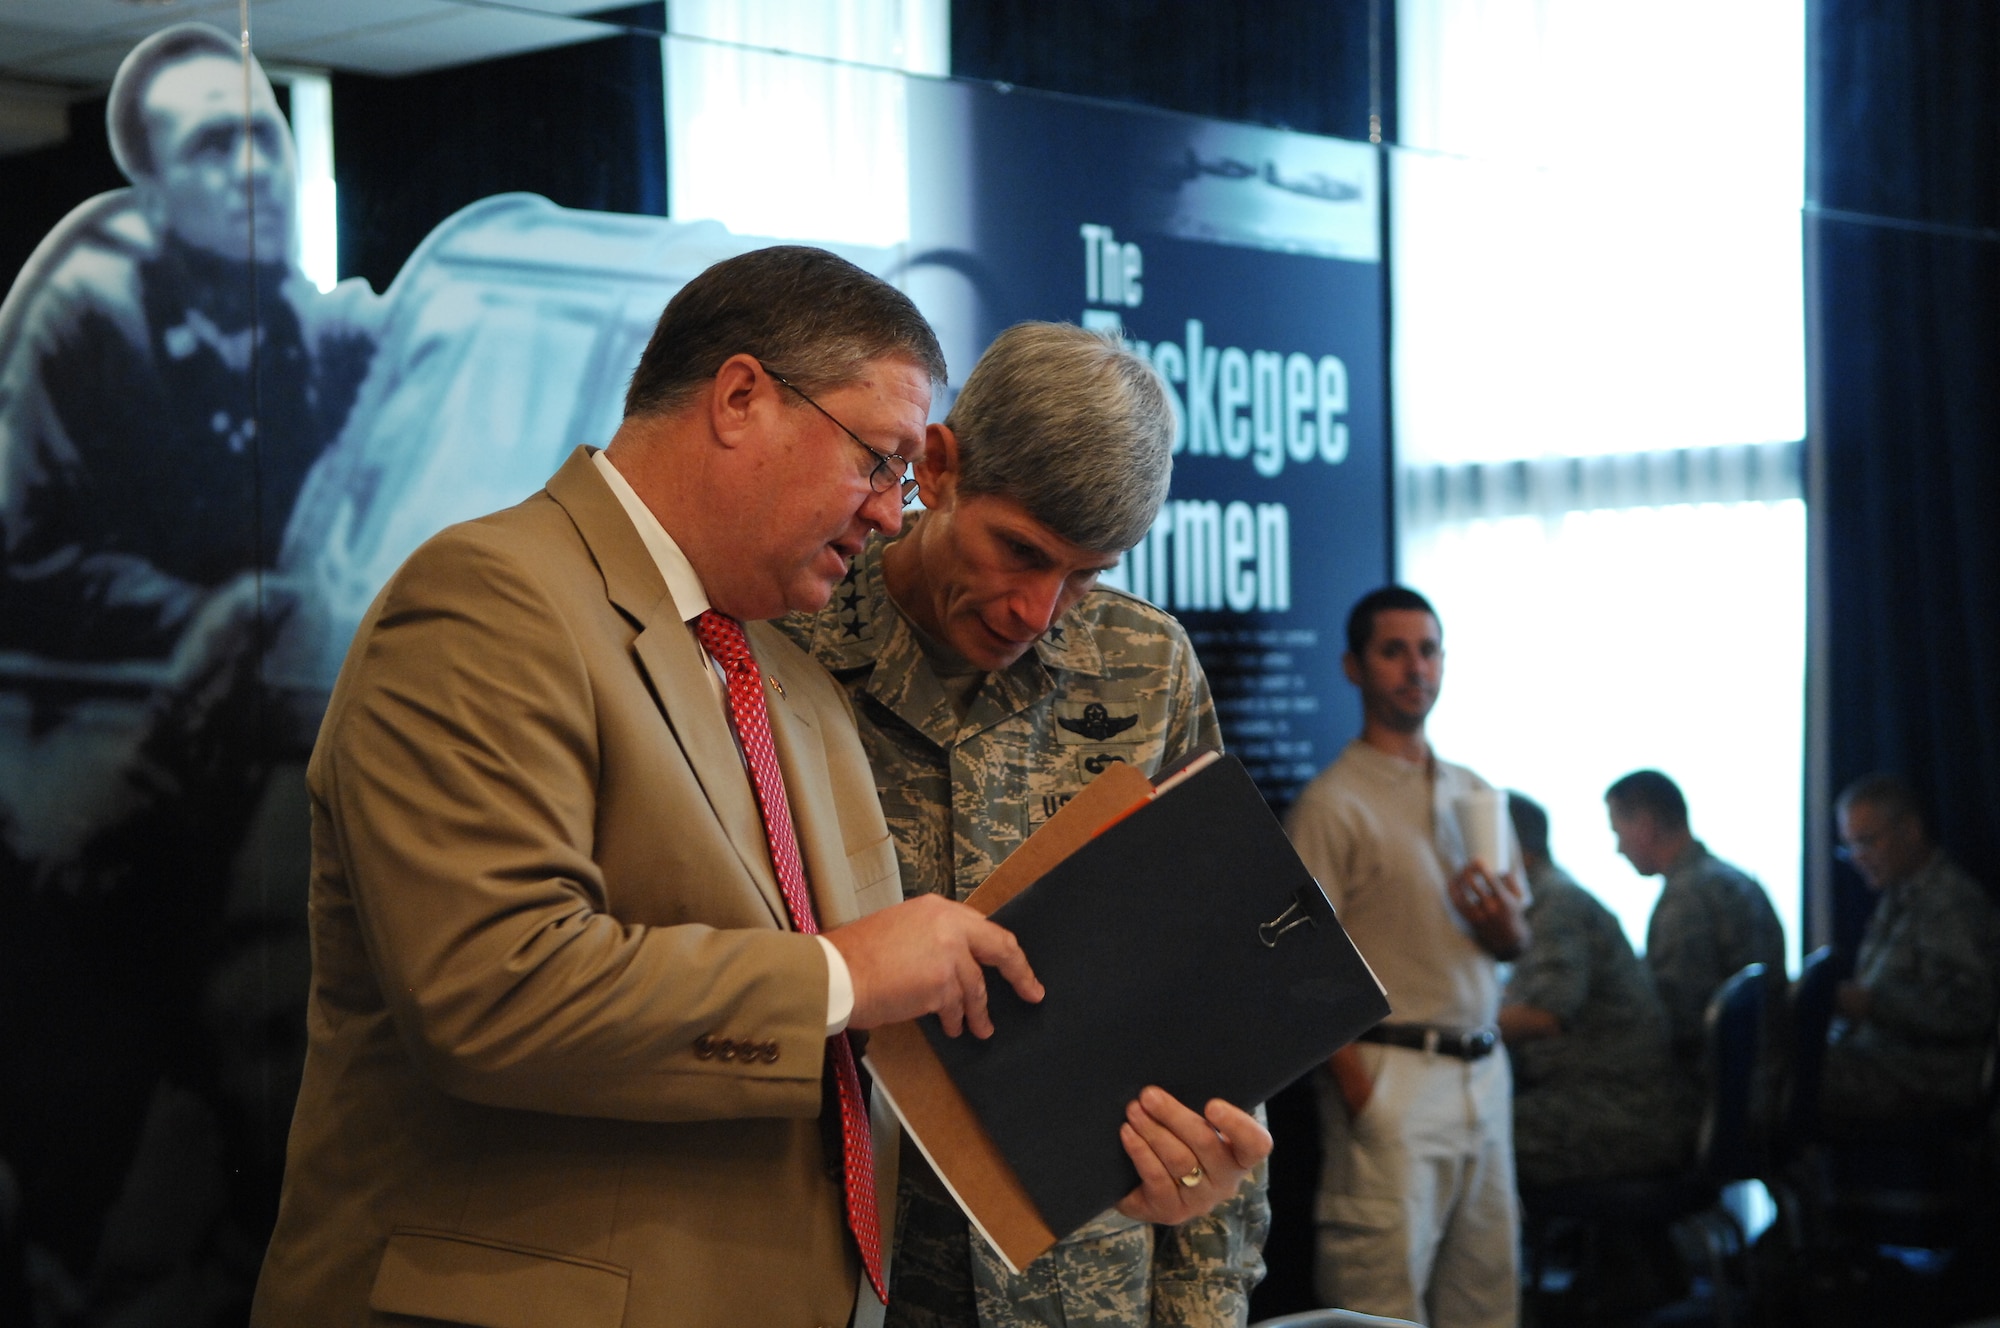 Acting Secretary of the Air Force Michael B. Donley and Chief of Staff Gen. Norton A. Schwartz discuss conference items Aug. 27, during a strategic summit at Bolling Air Force Base, D.C. (U.S. Air Force photo/Andy Morataya)
